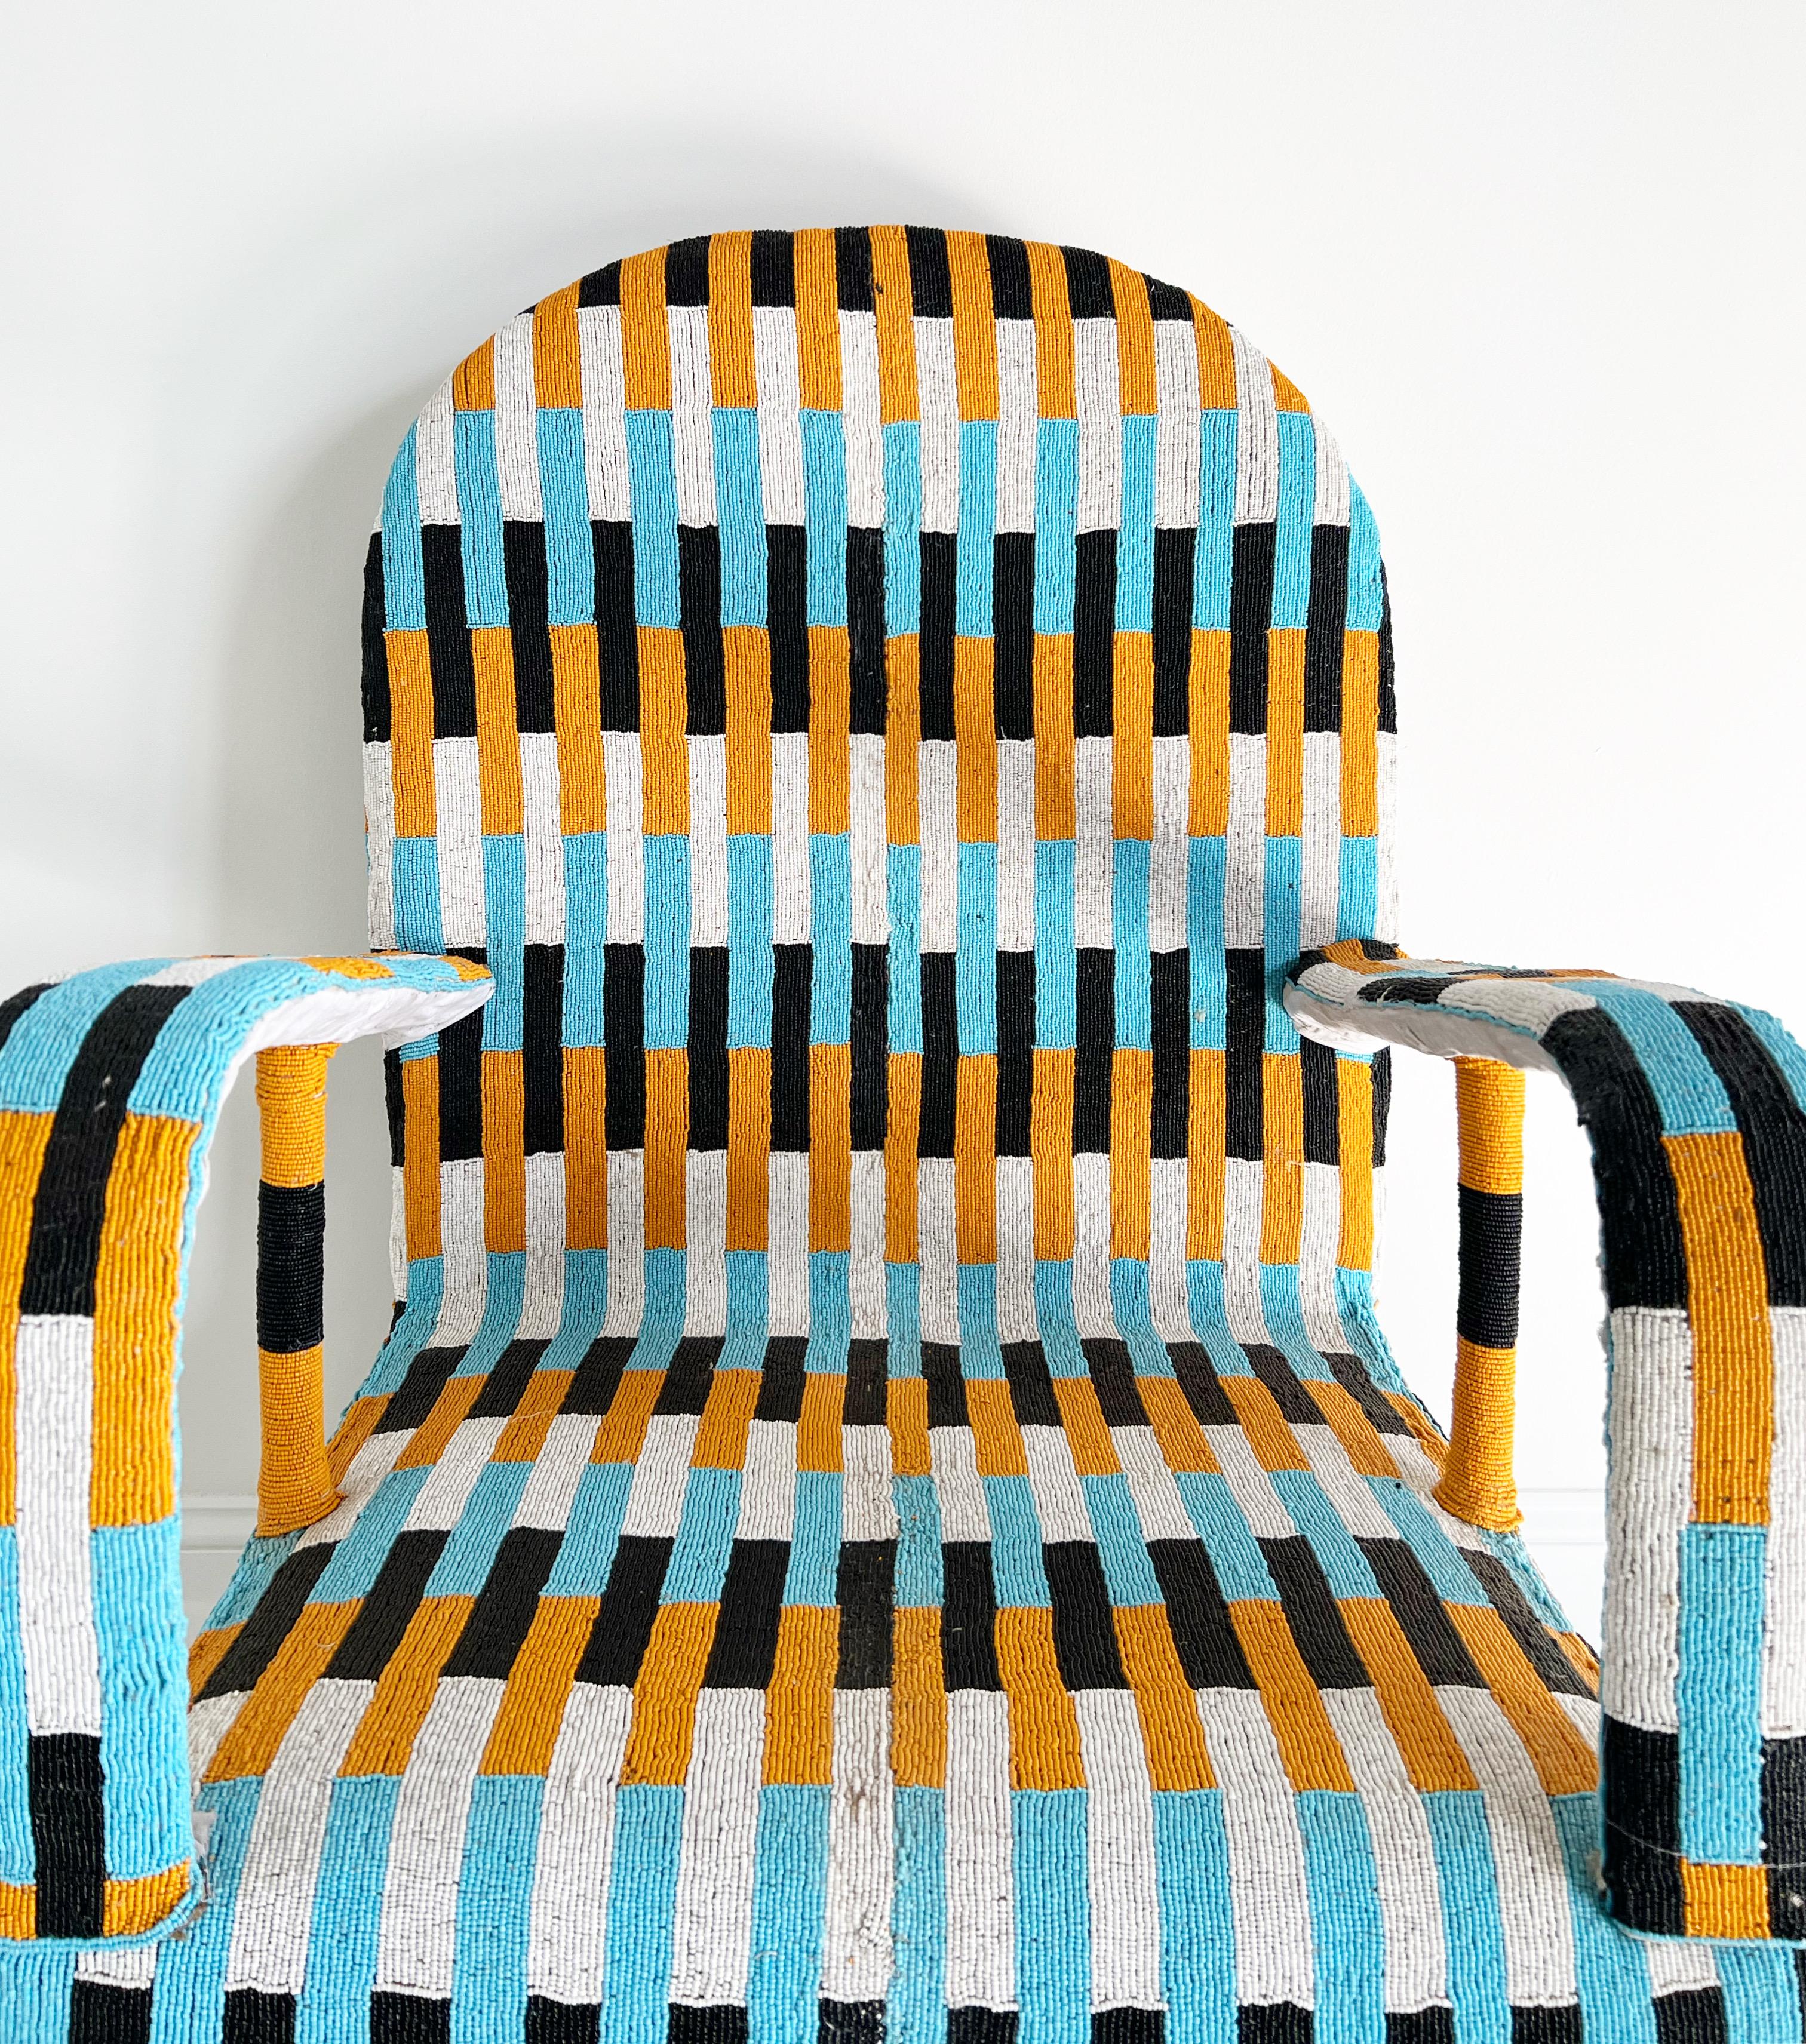 Description
Originally hand-crafted for the Nigerian Yoruba tribe kings and queens, each chair takes approximately 3 months to make. Thousands of tiny glass beads are intricately applied to canvas fabric in beautiful shapes and designs. The fabric